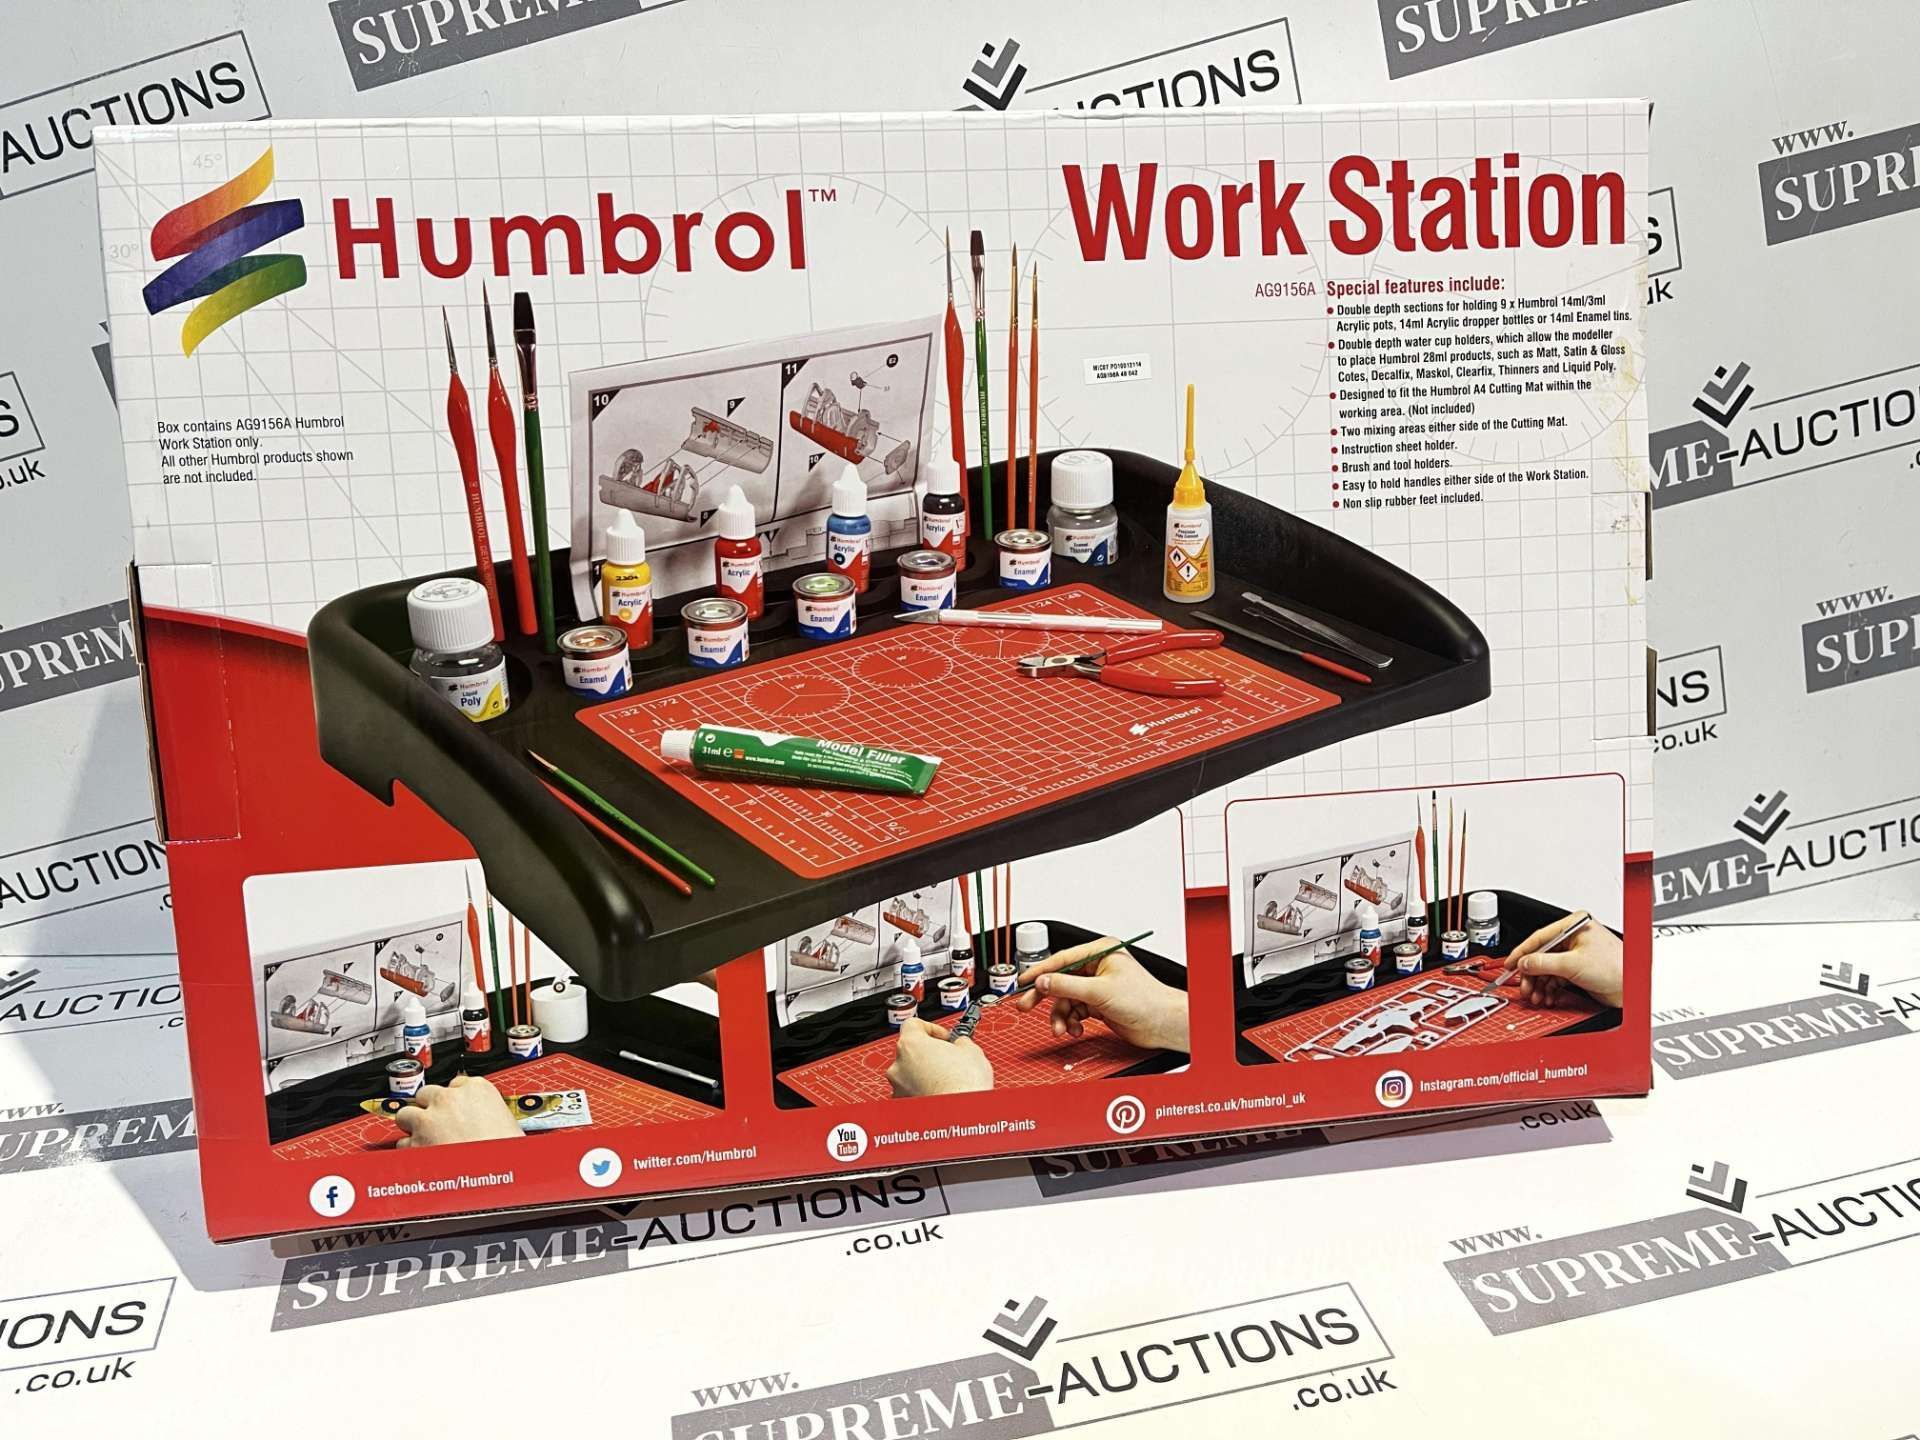 BRAND NEW HUMBROL MODEL KIT INCLUDING WORKSTATION, A4 CUTTING MAT, TOOL SET AND AIRFIX STARTER SET